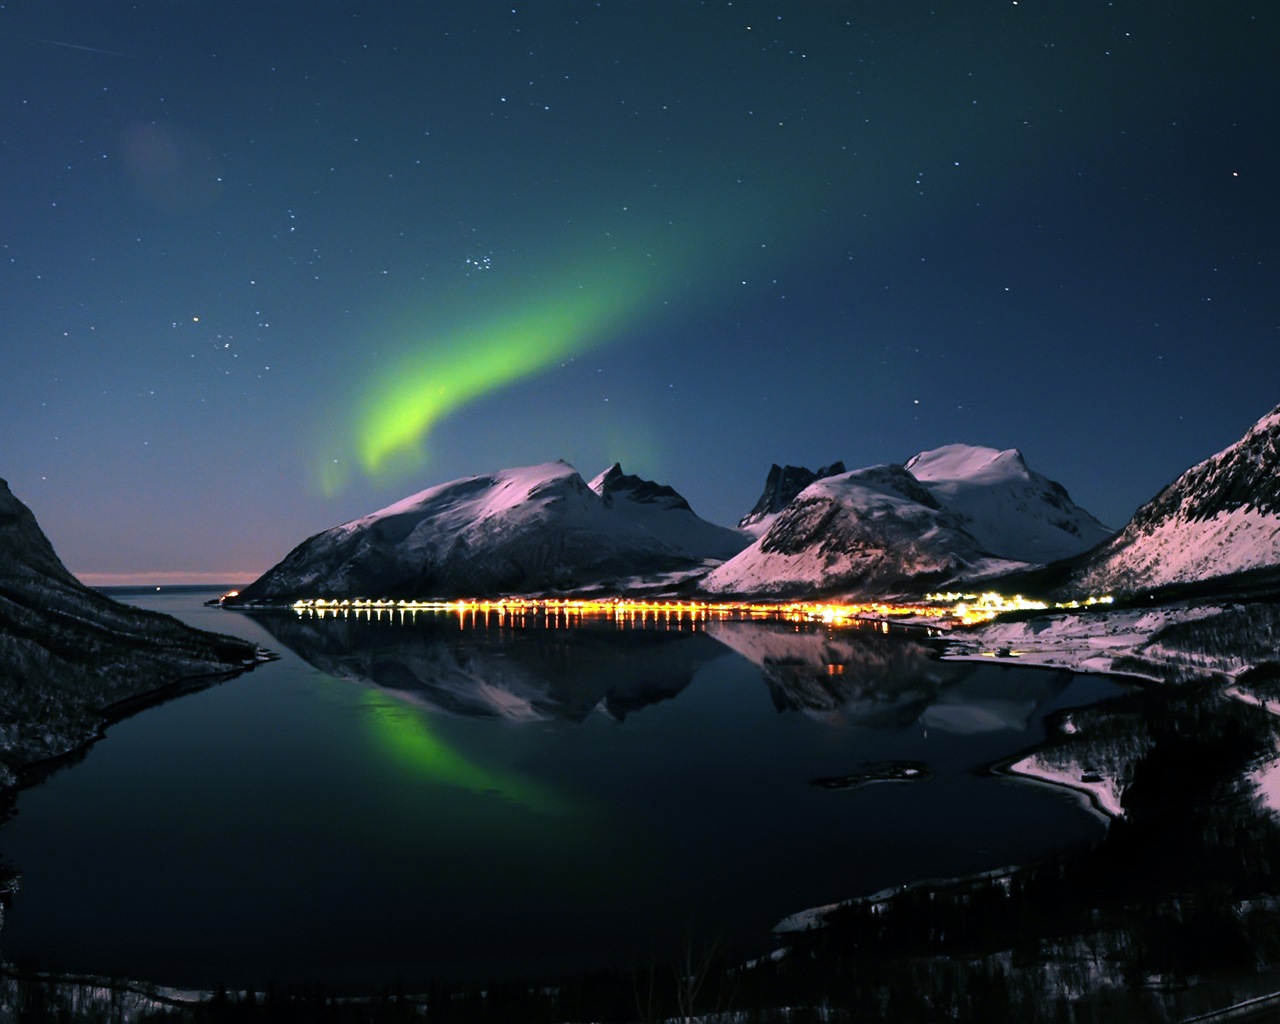 Natural wonders of the Northern Lights HD Wallpaper (2) #2 - 1280x1024